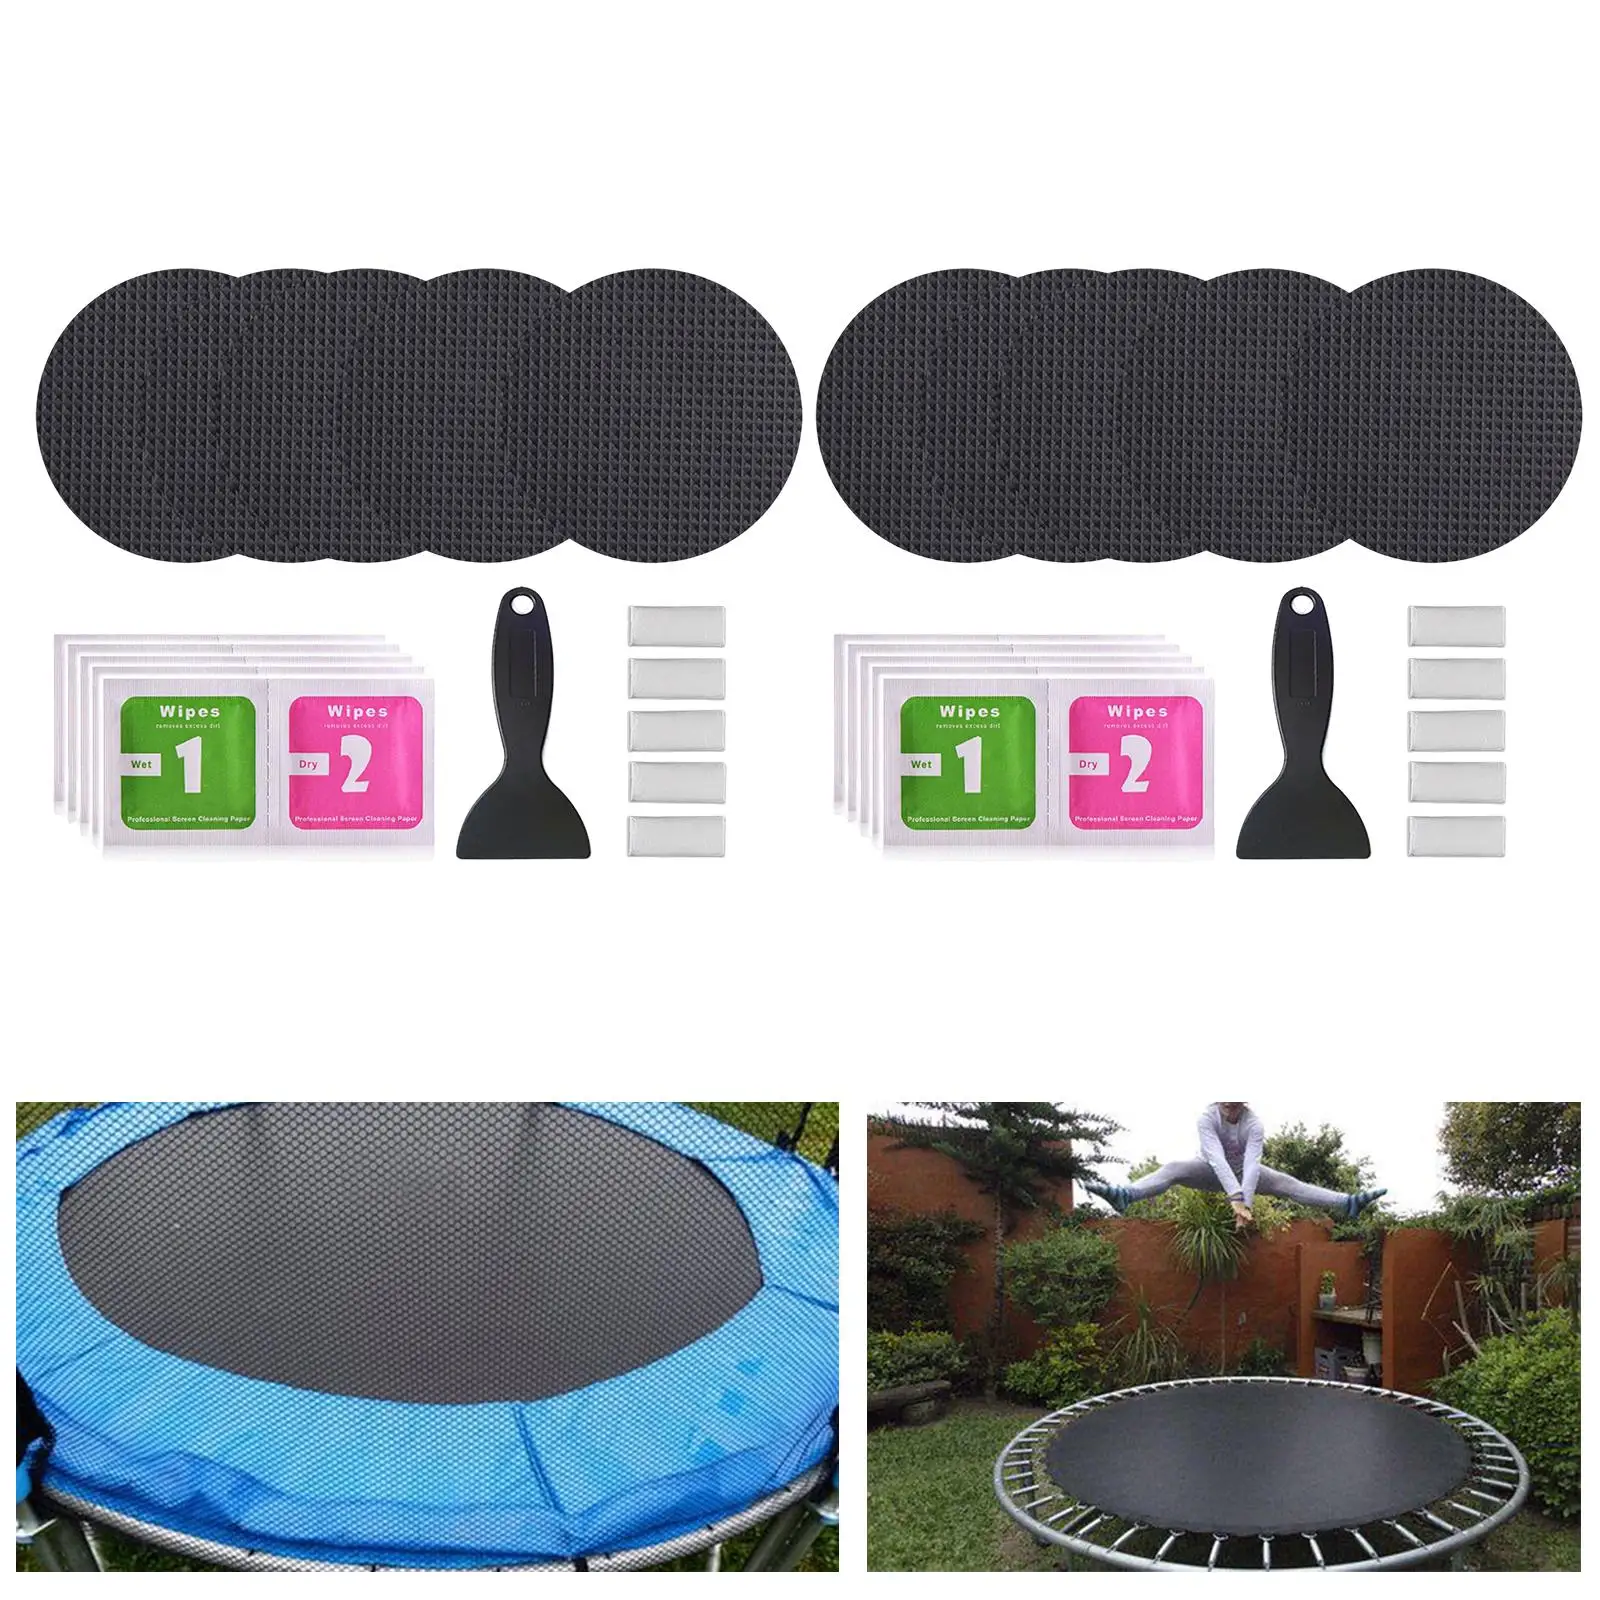 Professional Trampoline Patch Repair Kits Mesh Hole Patch for Garden Tent Repair